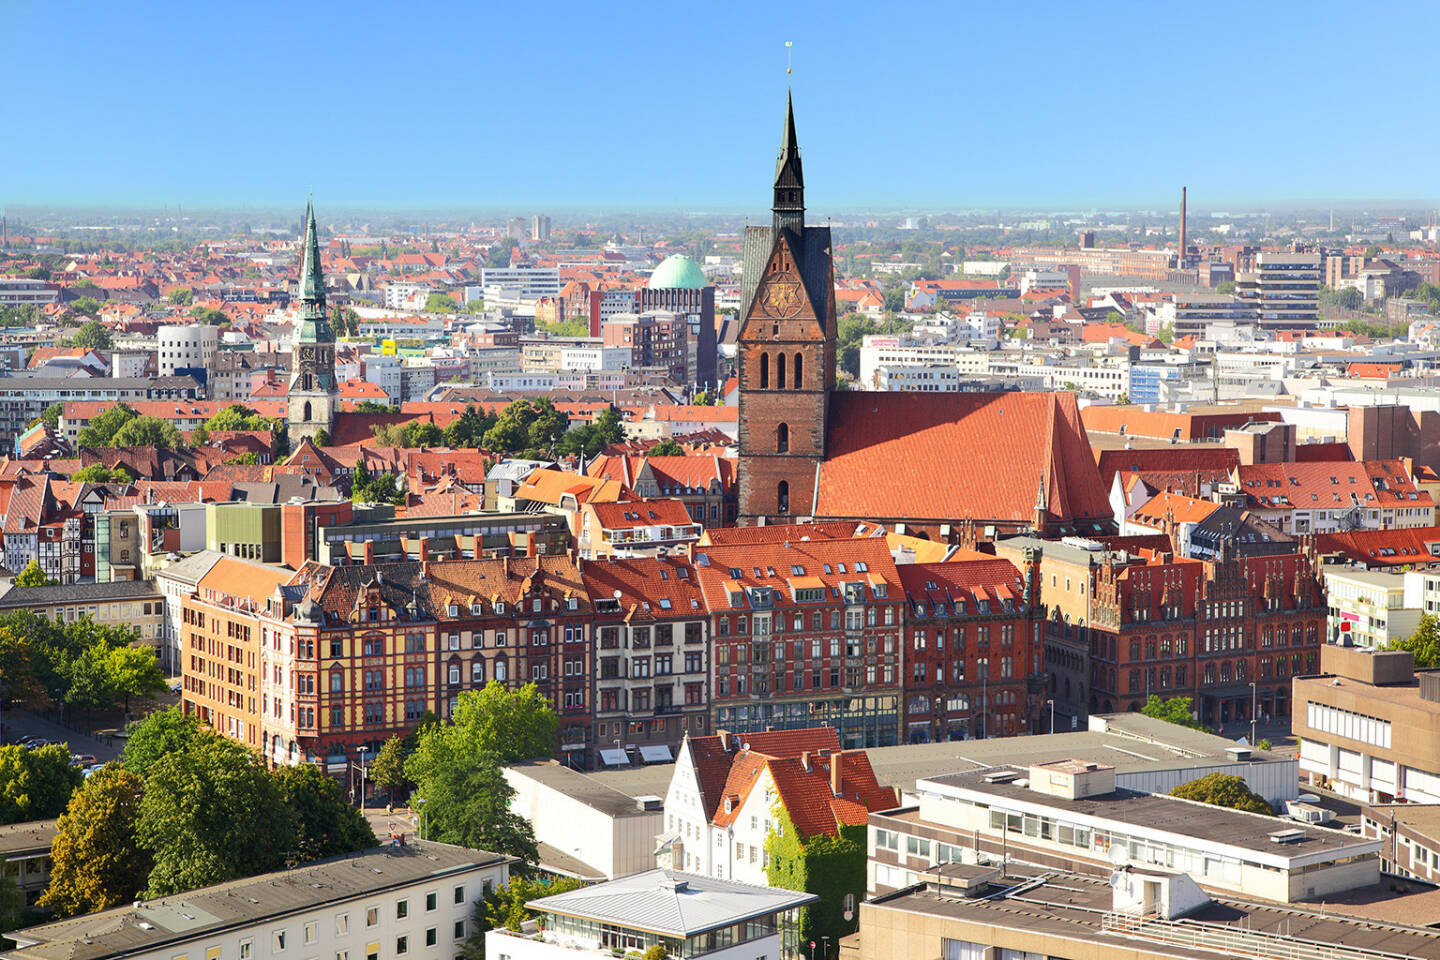 Hannover, Stadt-Zentrum, http://www.shutterstock.com/pic-112302332/stock-photo-panoramic-view-of-hanover-city-germany.html